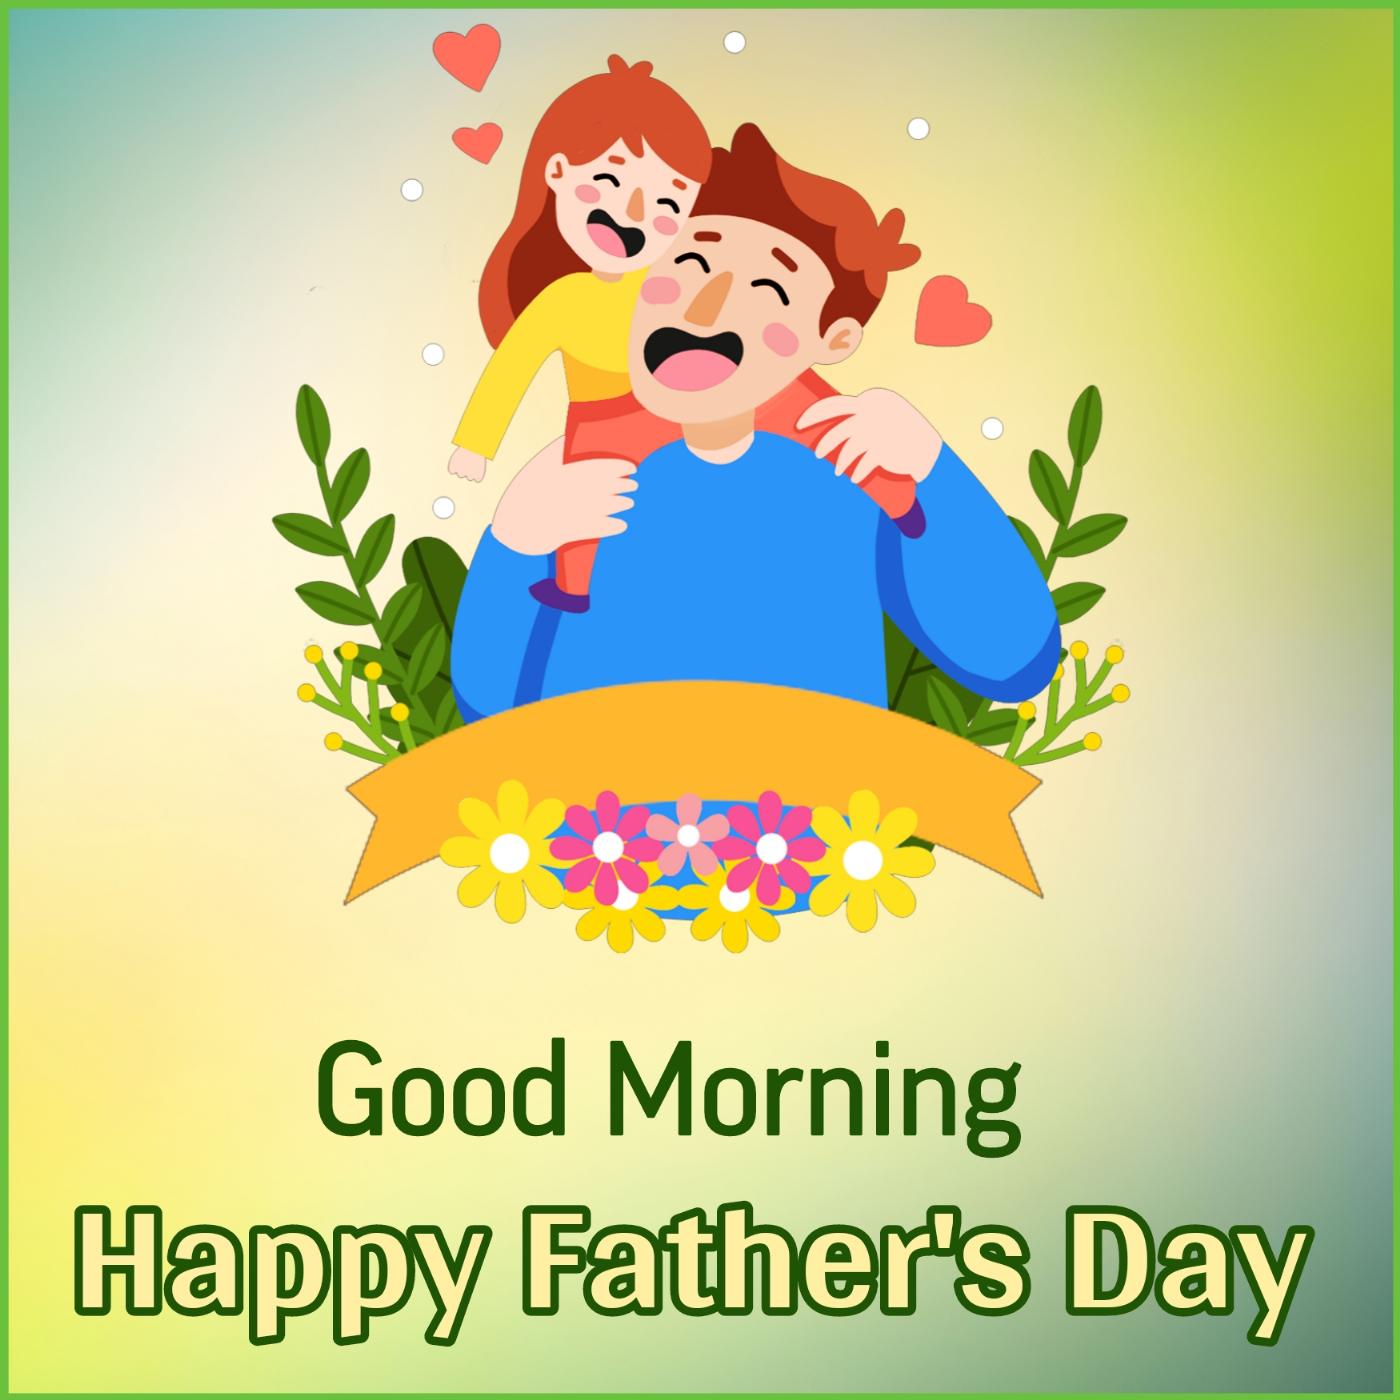 Happy Father's Day Good Morning Images